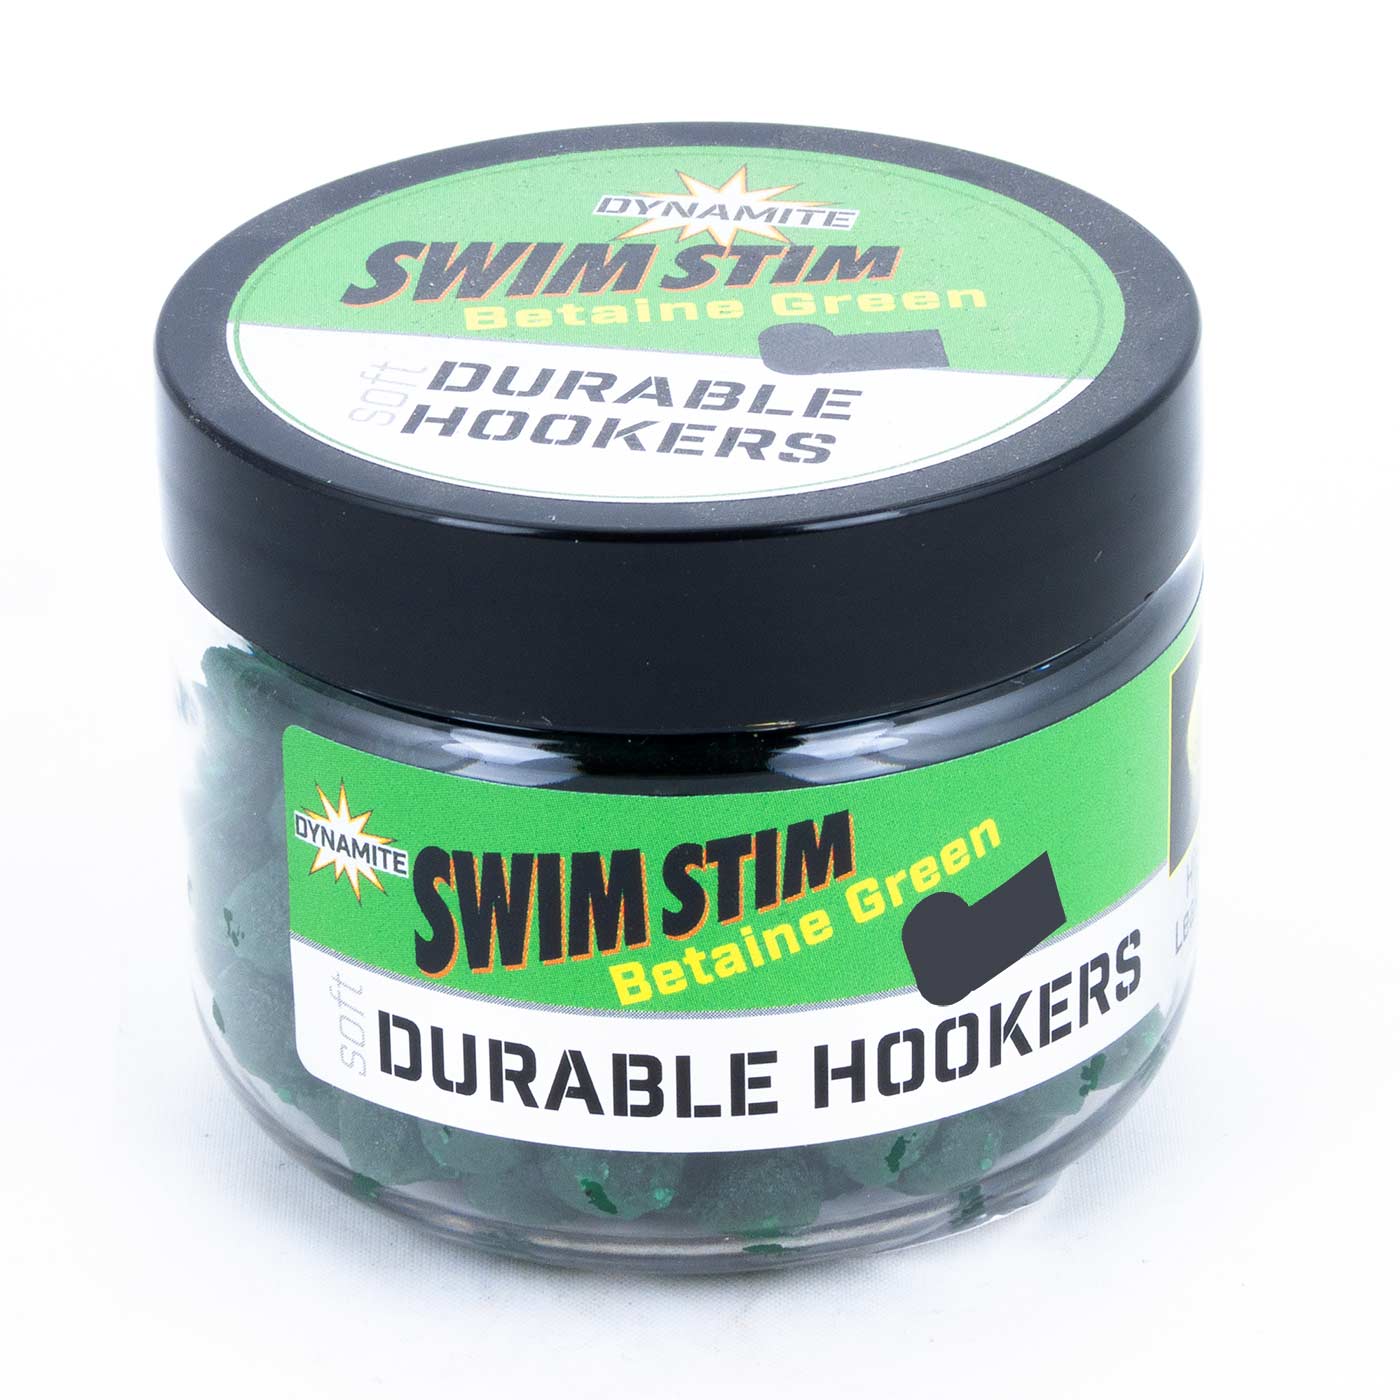 Durable Hookers - Green Betaine